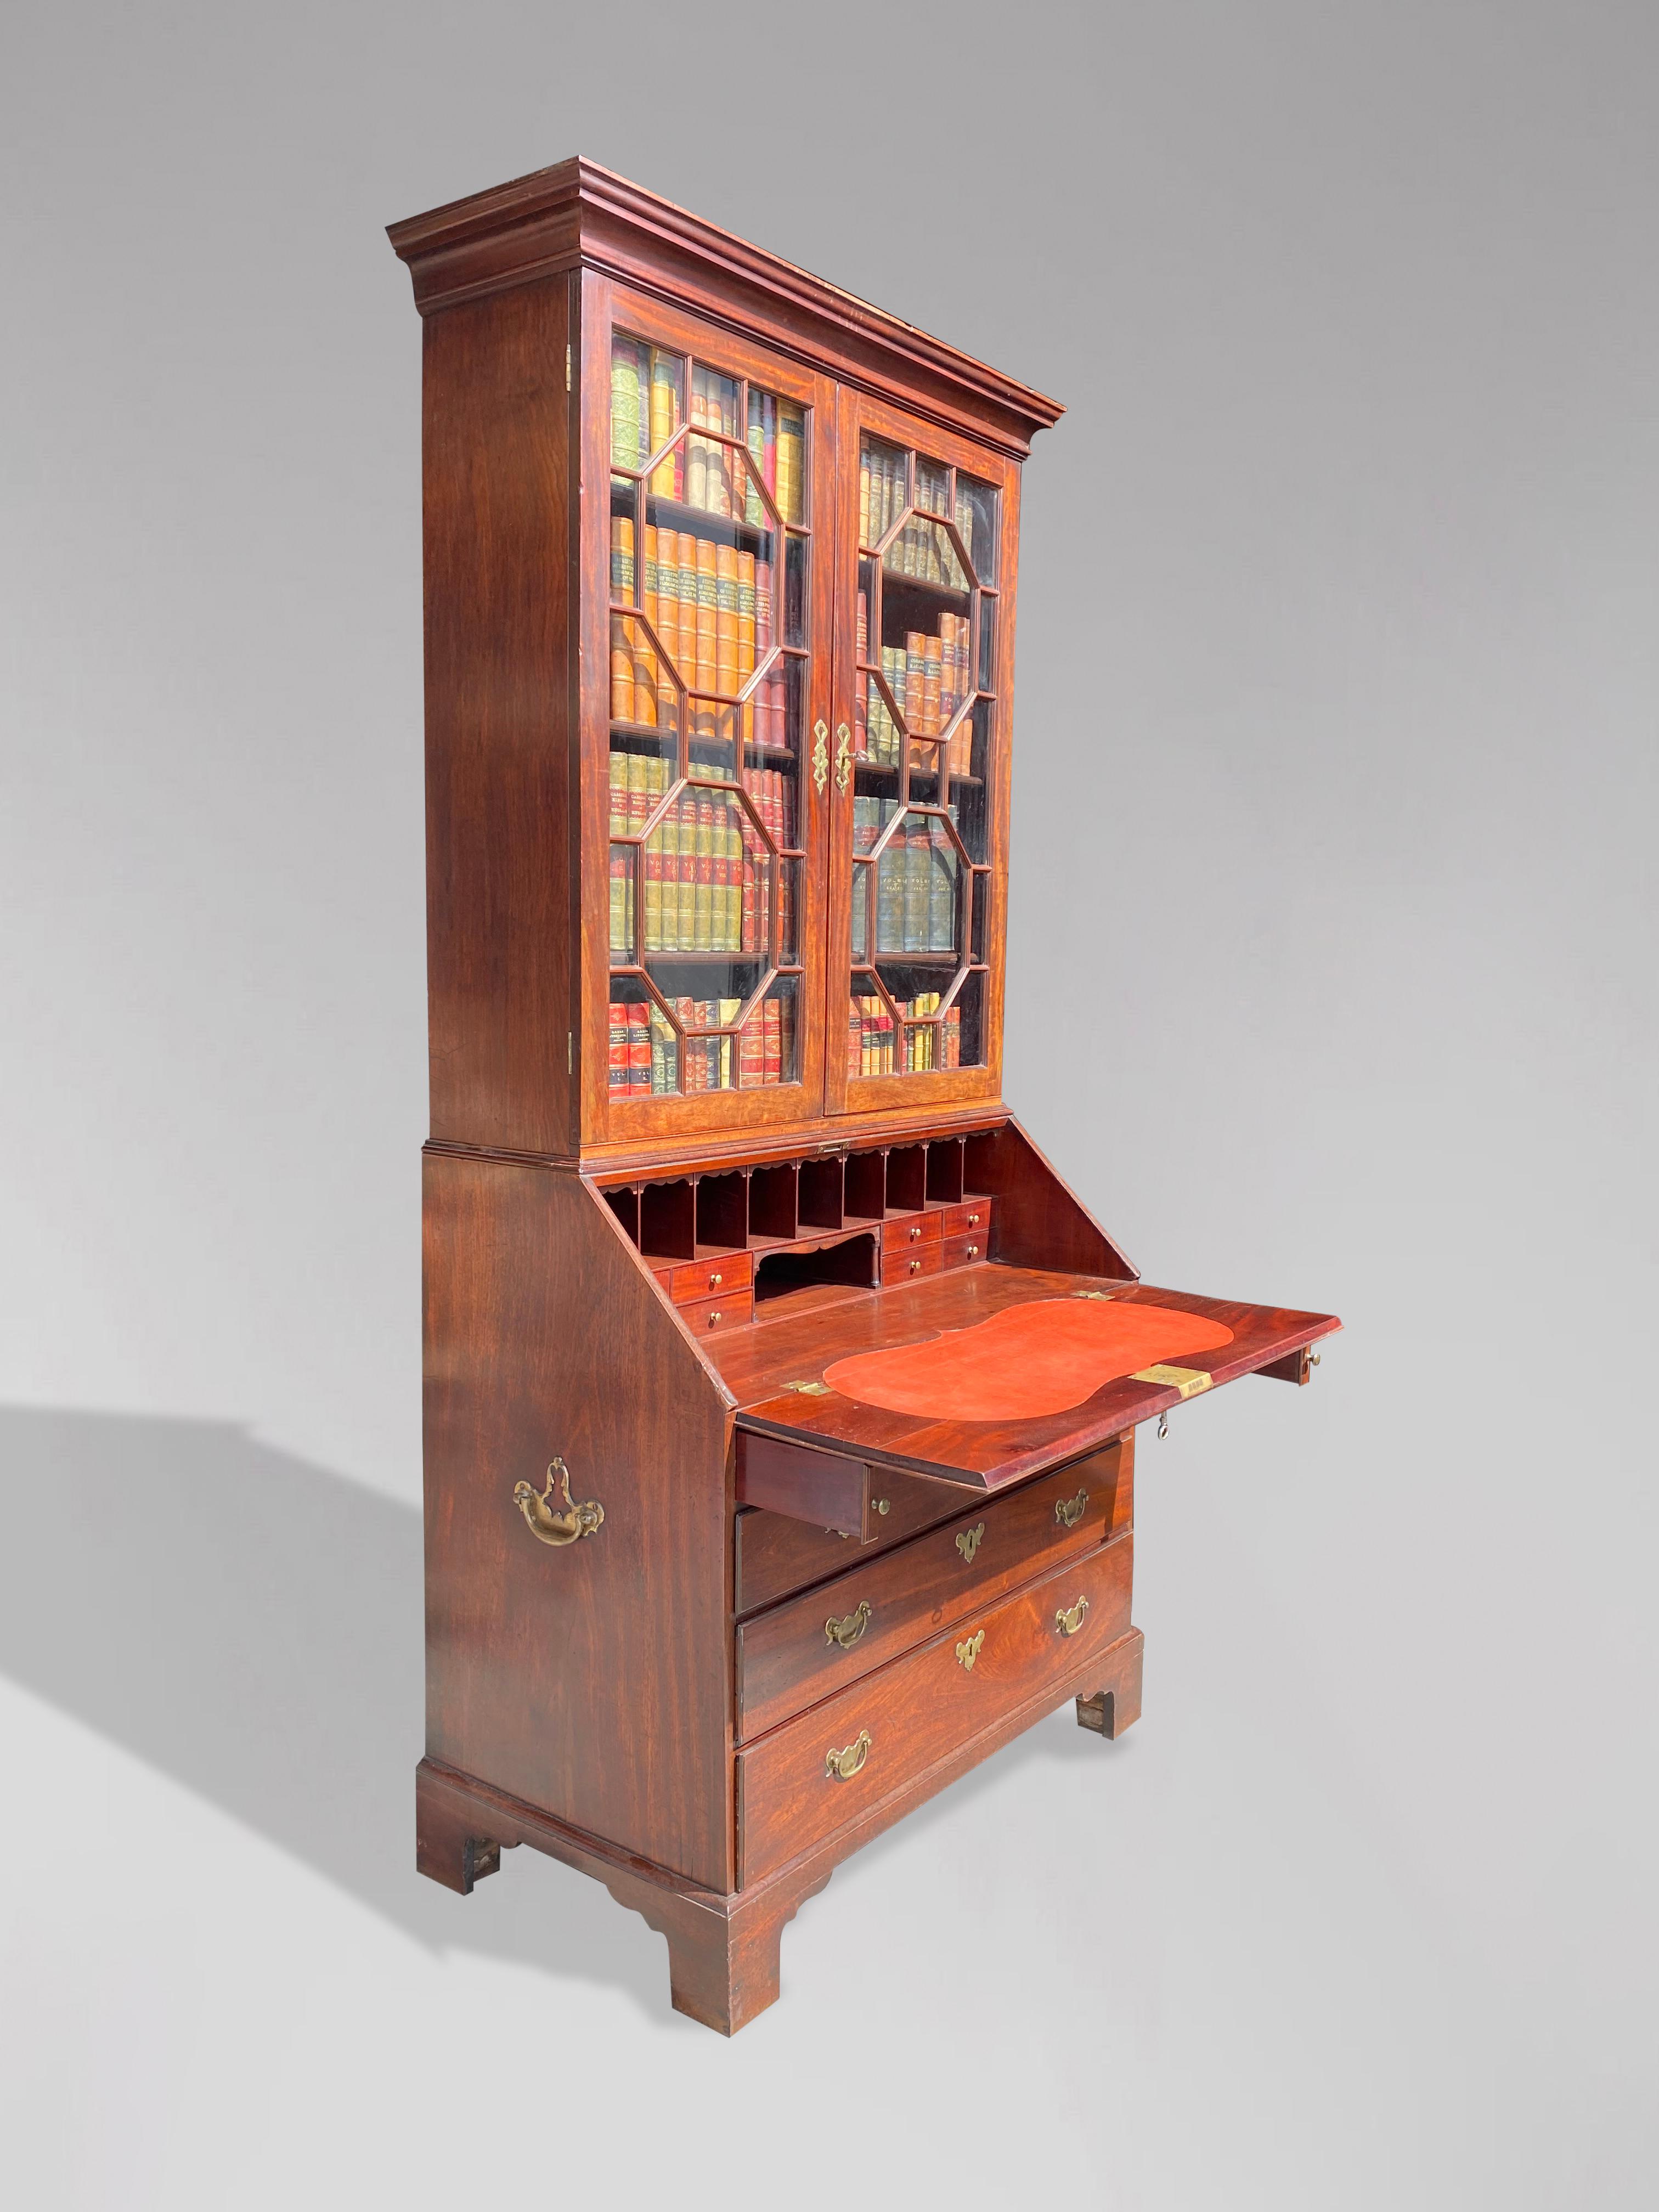 18th Century George III Period Mahogany Bureau Bookcase In Good Condition For Sale In Petworth,West Sussex, GB